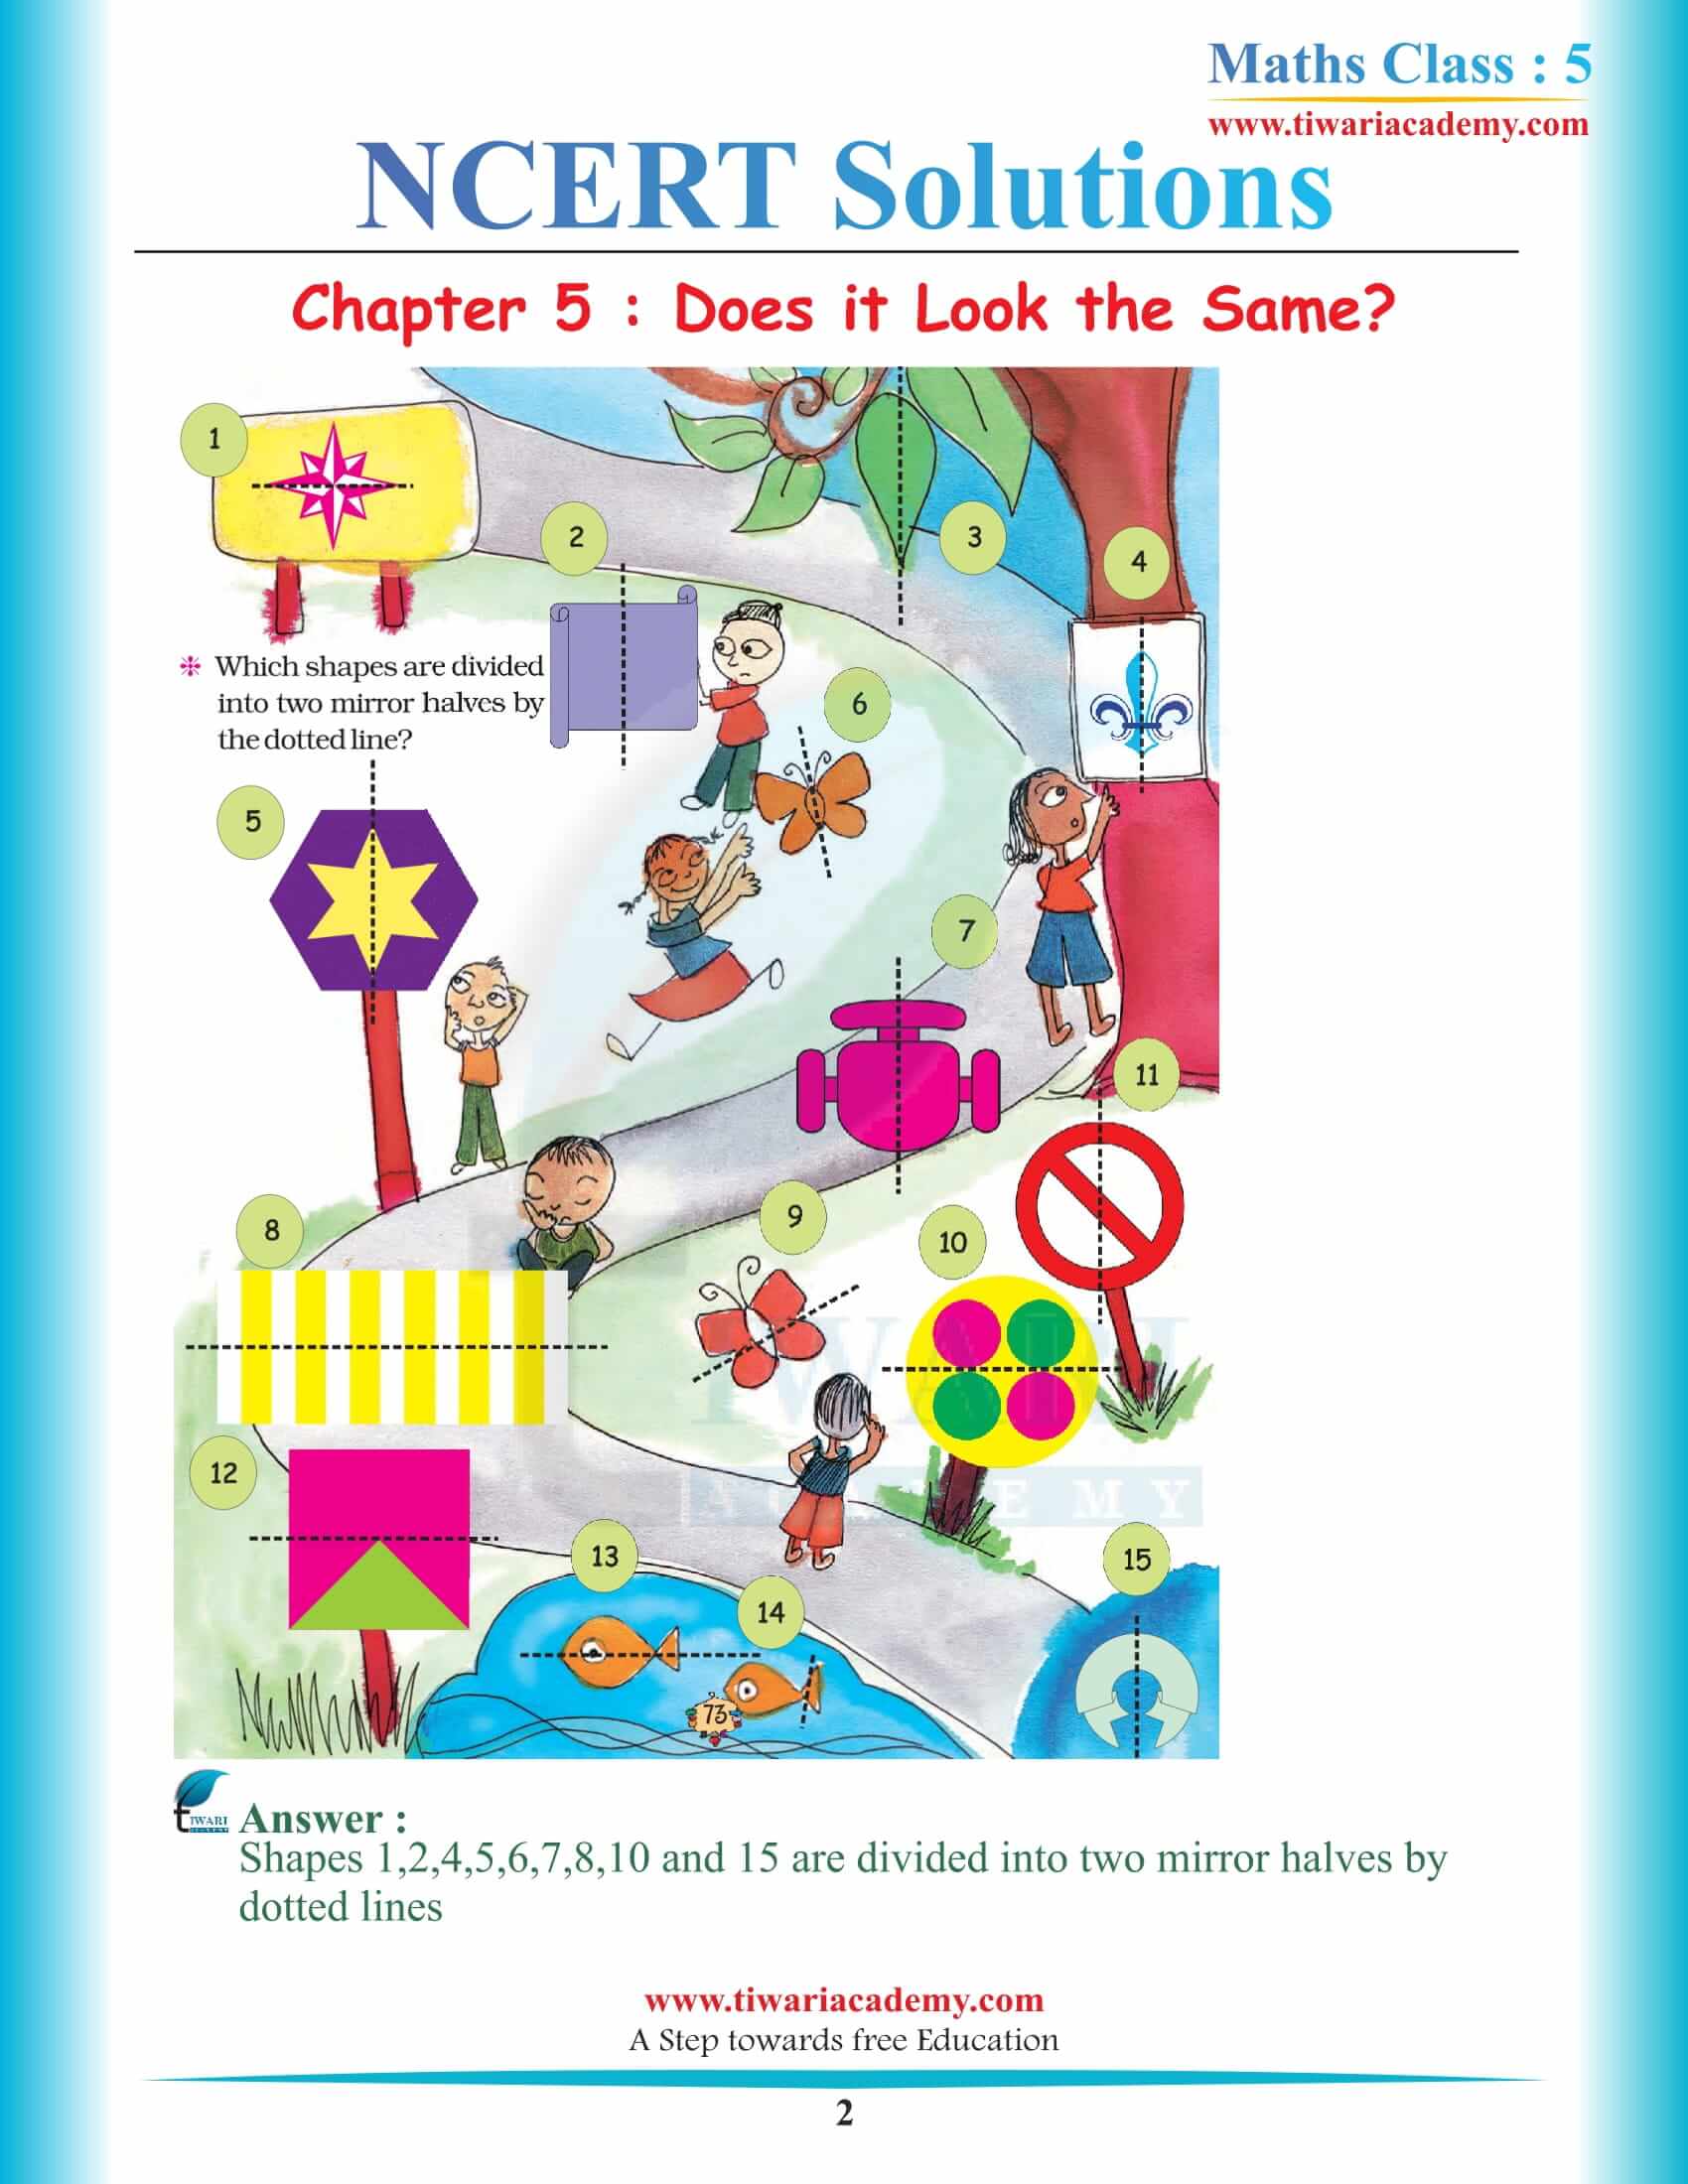 NCERT Solutions for Class 5 Maths Chapter 5 in PDF